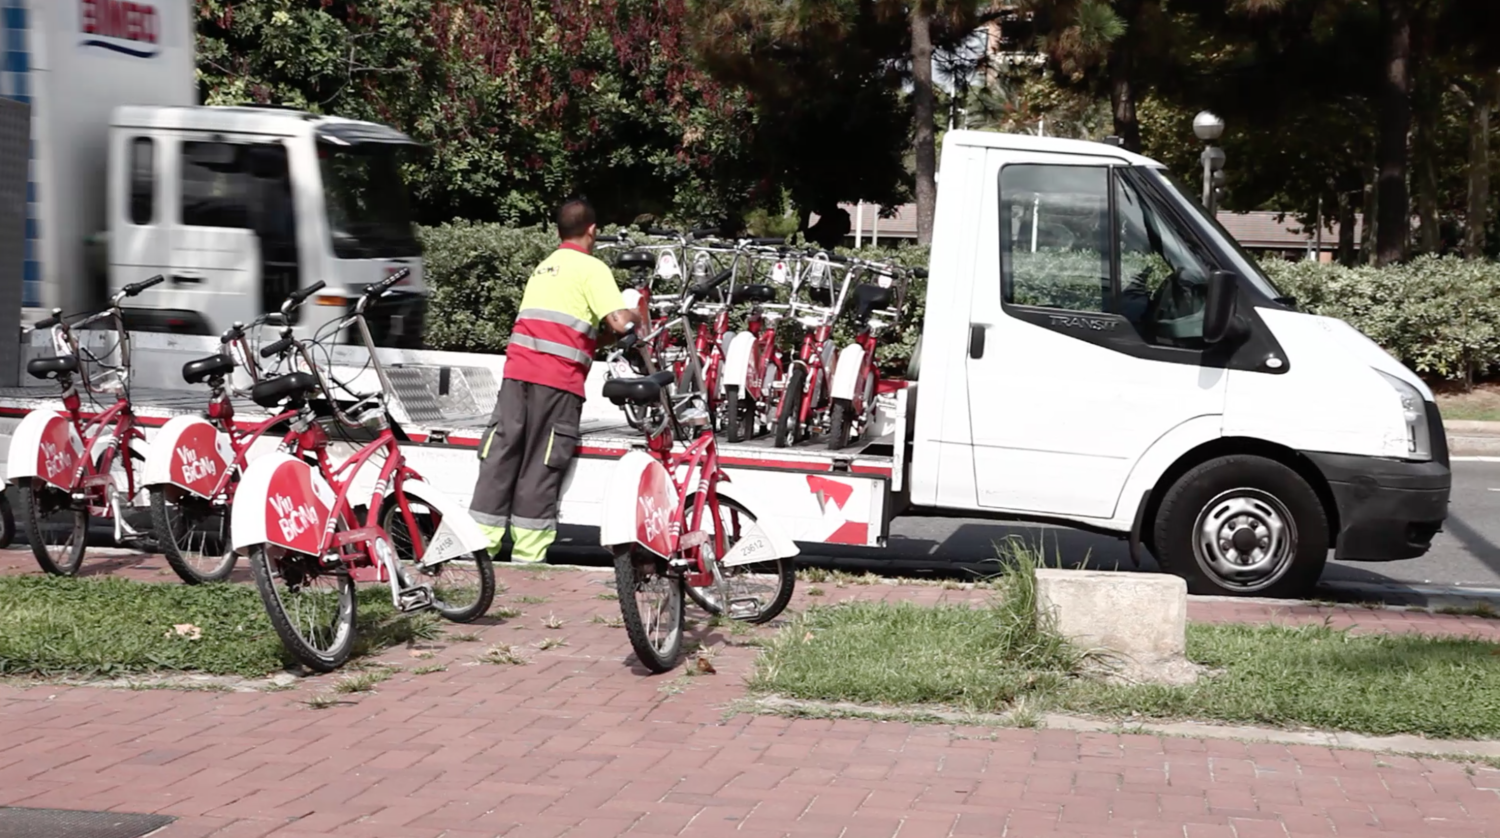 bicycle sharing system cost